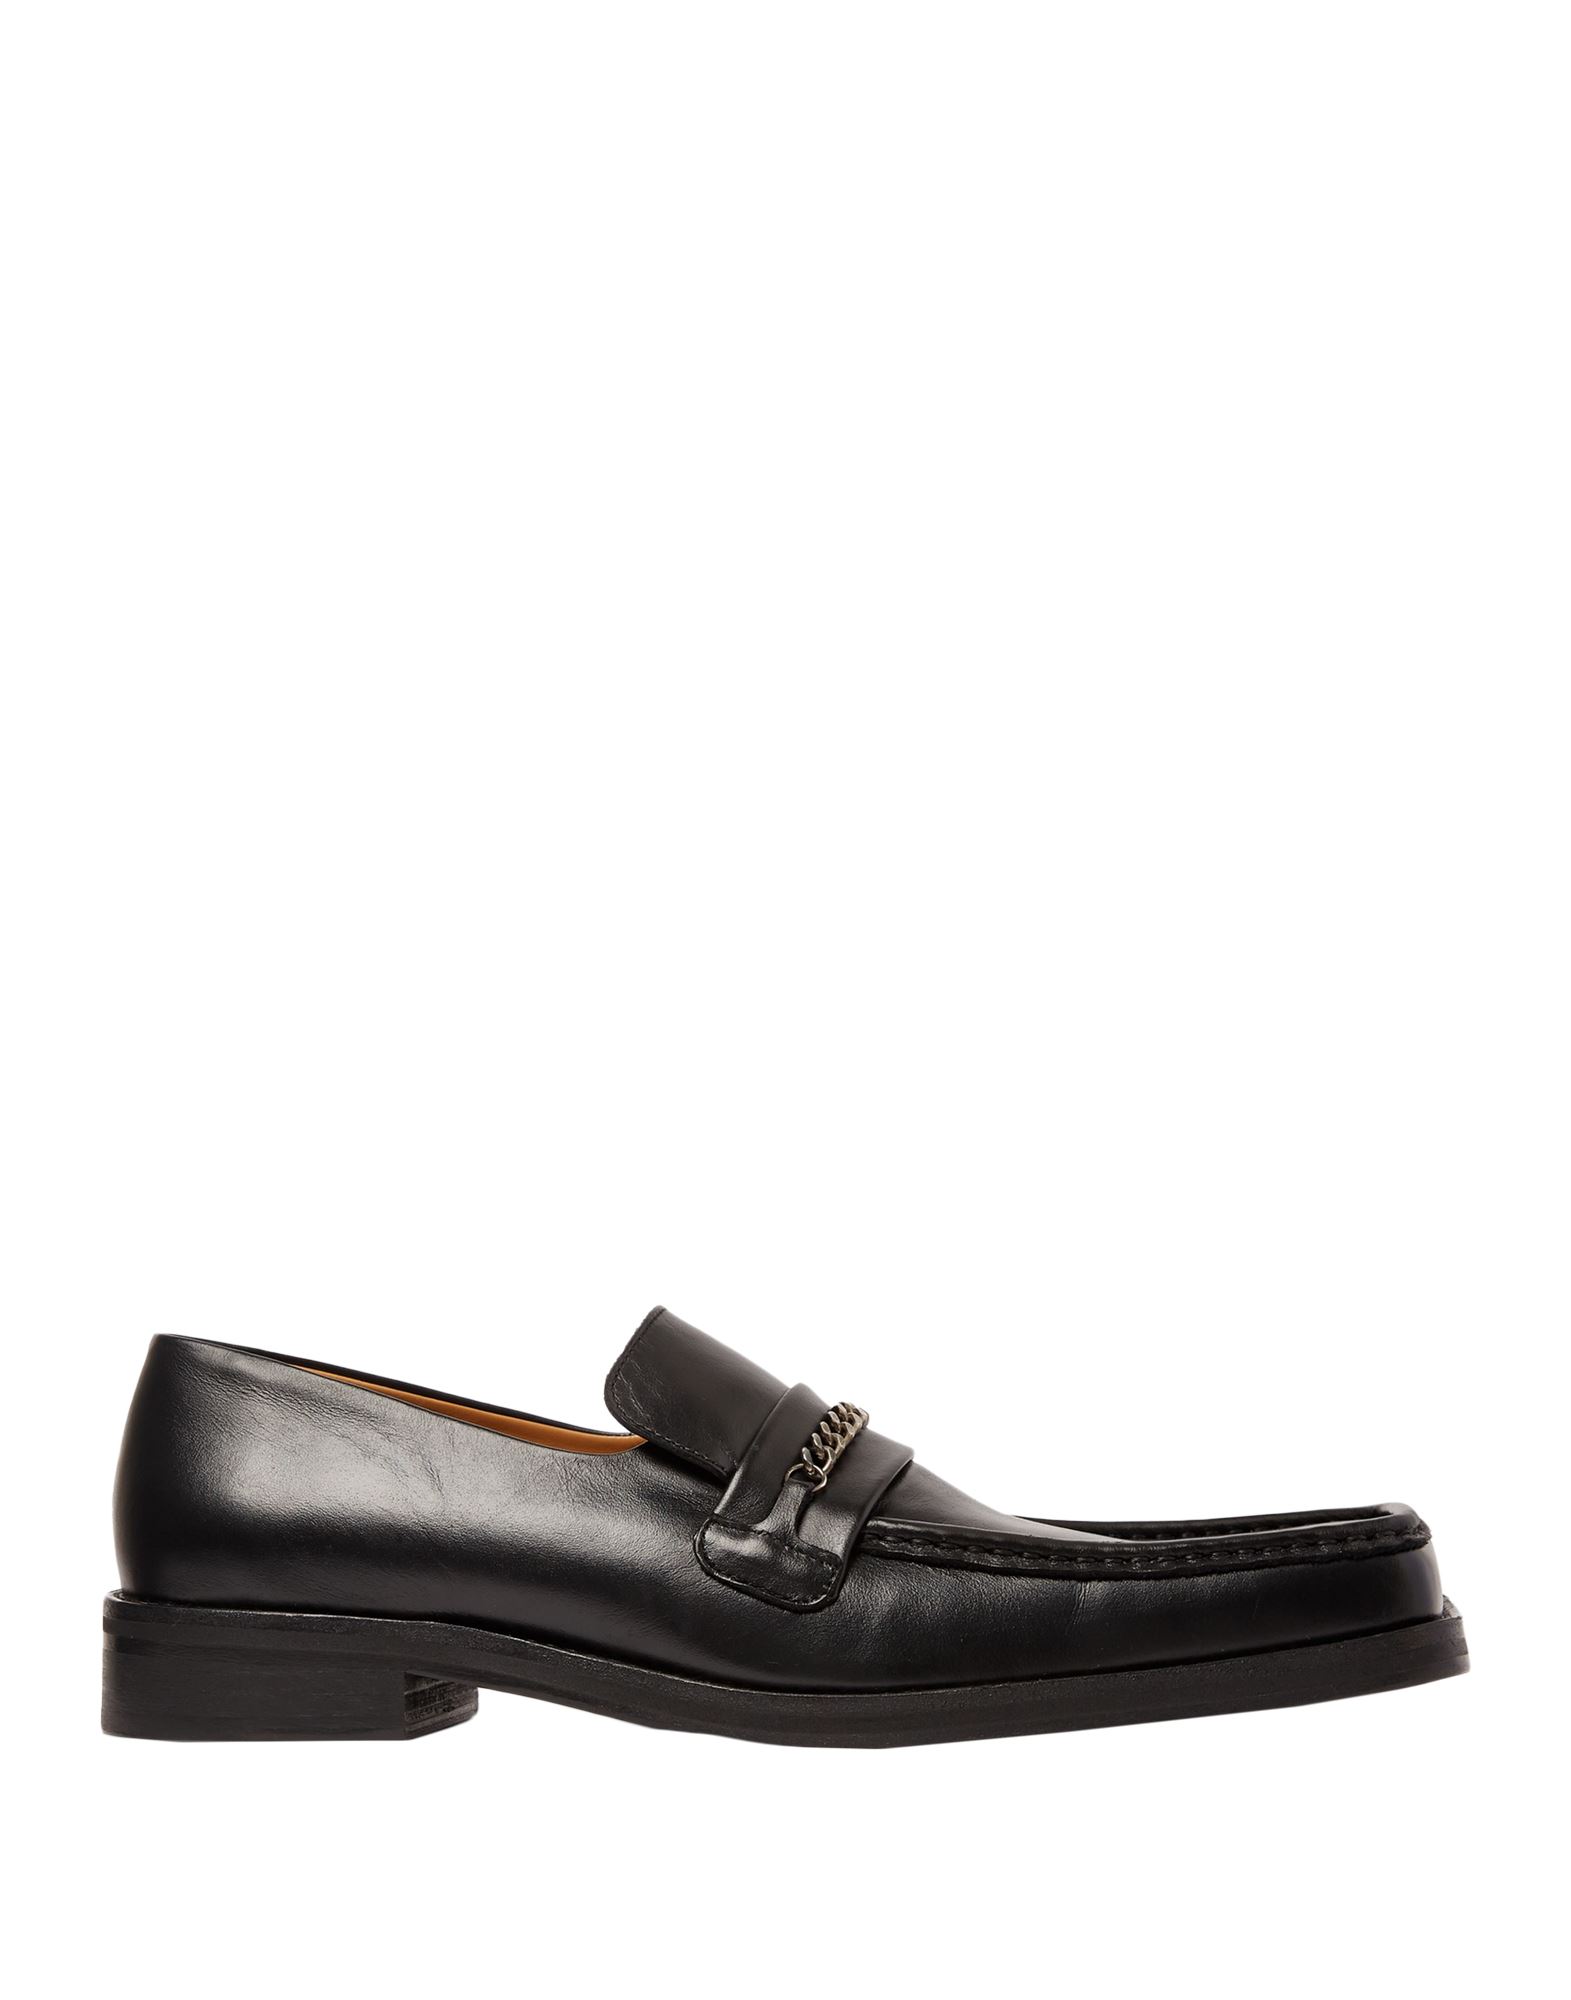 Martine Rose Loafers In Black | ModeSens